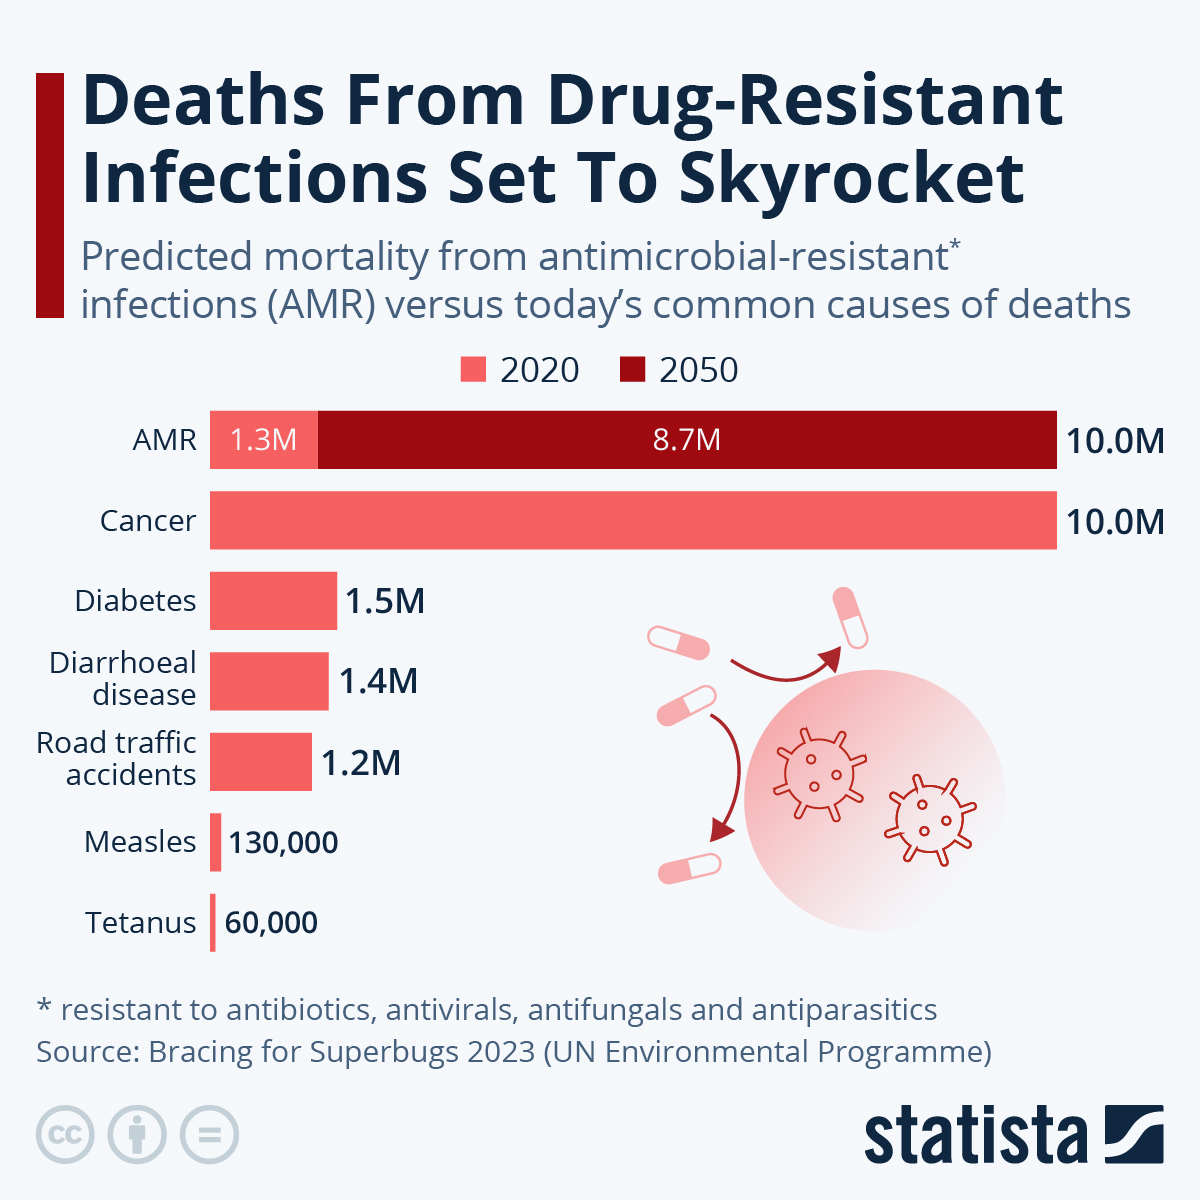 By 2050, AMR is predicted to cause as many deaths as cancer did in 2020, with 10 million deaths annually. This alarming forecast highlights the urgency in cancer care and treatment. Join our fight against AMR & safeguard our future. @statistacharts